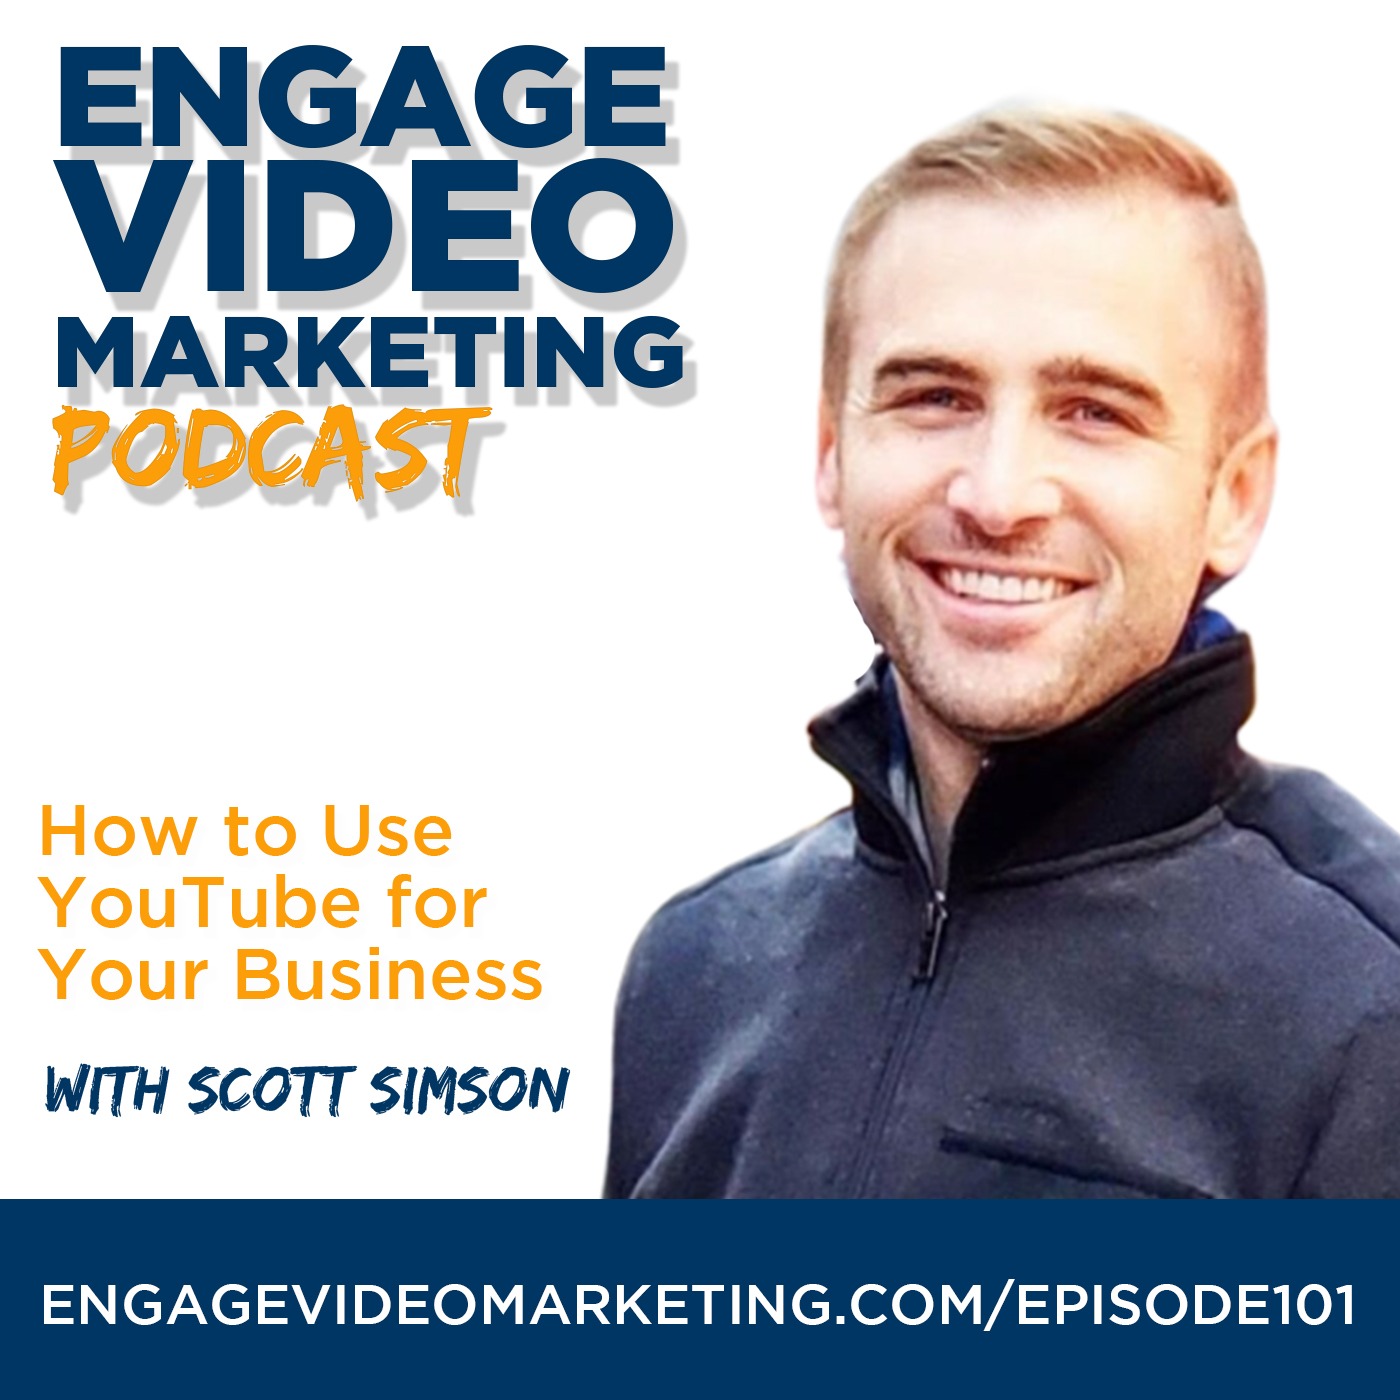 How to Use YouTube for Your Business with Scott Simson